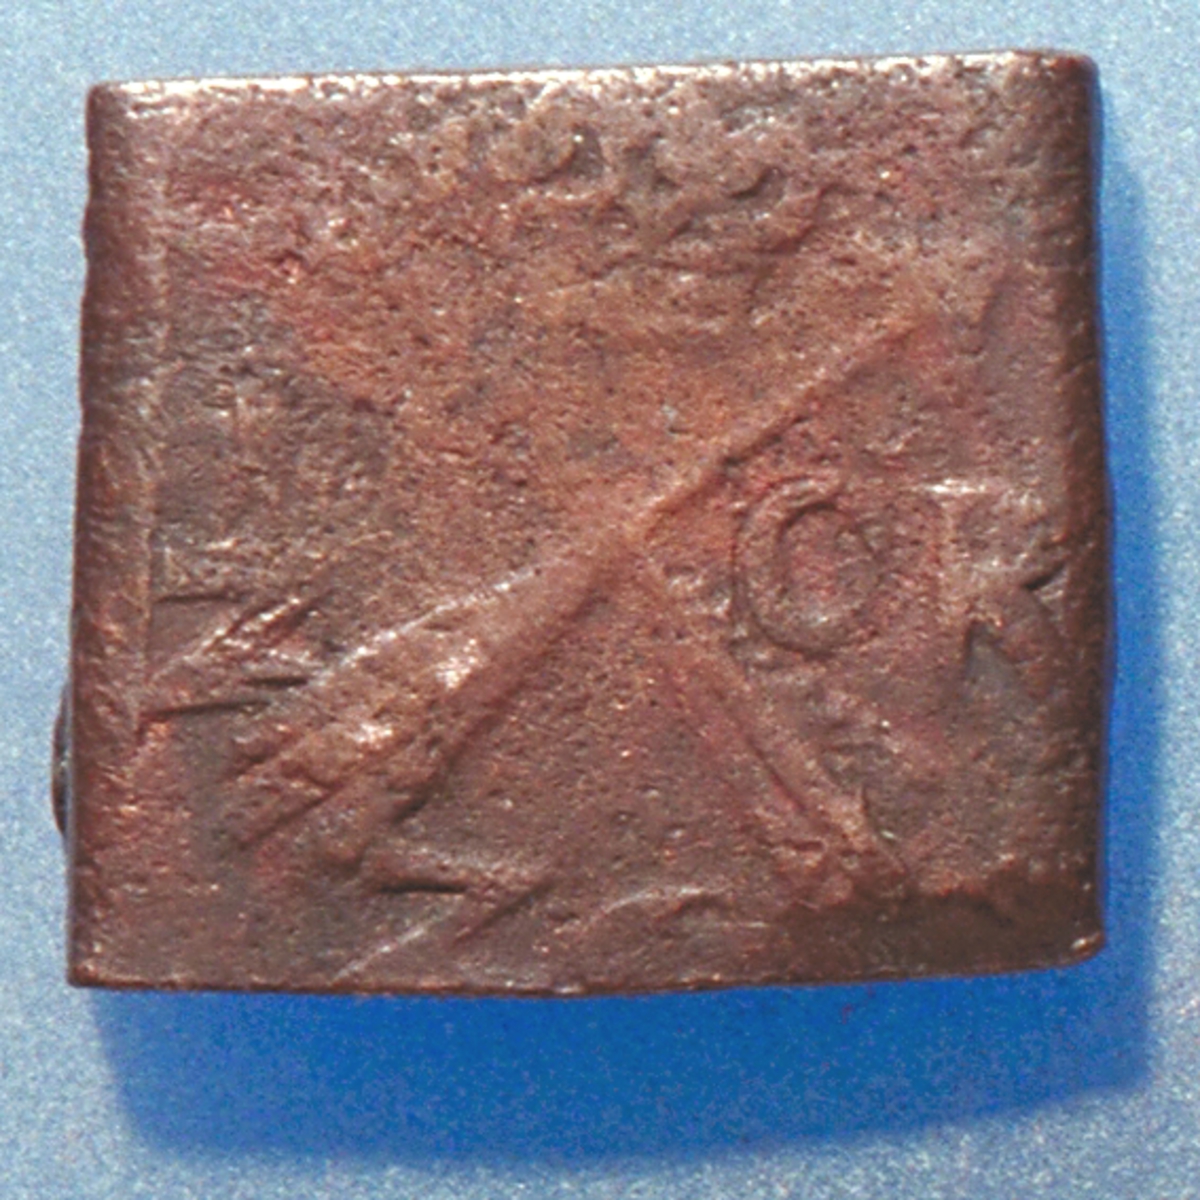 Â½- öre

Fyrkantigt mynt.

Bra skick, något slitet.

Vikt: 12,8 gram.



Text in English: Square-shaped coin. Denomination: Â½ - öre.

The obverse side has a Vasa sheaf in the centre, partly visible. The initial A placed above the sheaf.

The coin stamp is off-centre. The frame is partly visible.

The reverse side has two crossed arrows beneath a crown, faintly visible. On the left hand side is the fraction Â½, and on the right the initials ÖR, faintly visible.

The two digit year of coinage, 26 (1626), is placed beneath the arrows.

The coin stamp is off-centre. The frame is partly visible.



Present condition: the reverse side is worn.

Weight: 12,8 gram.